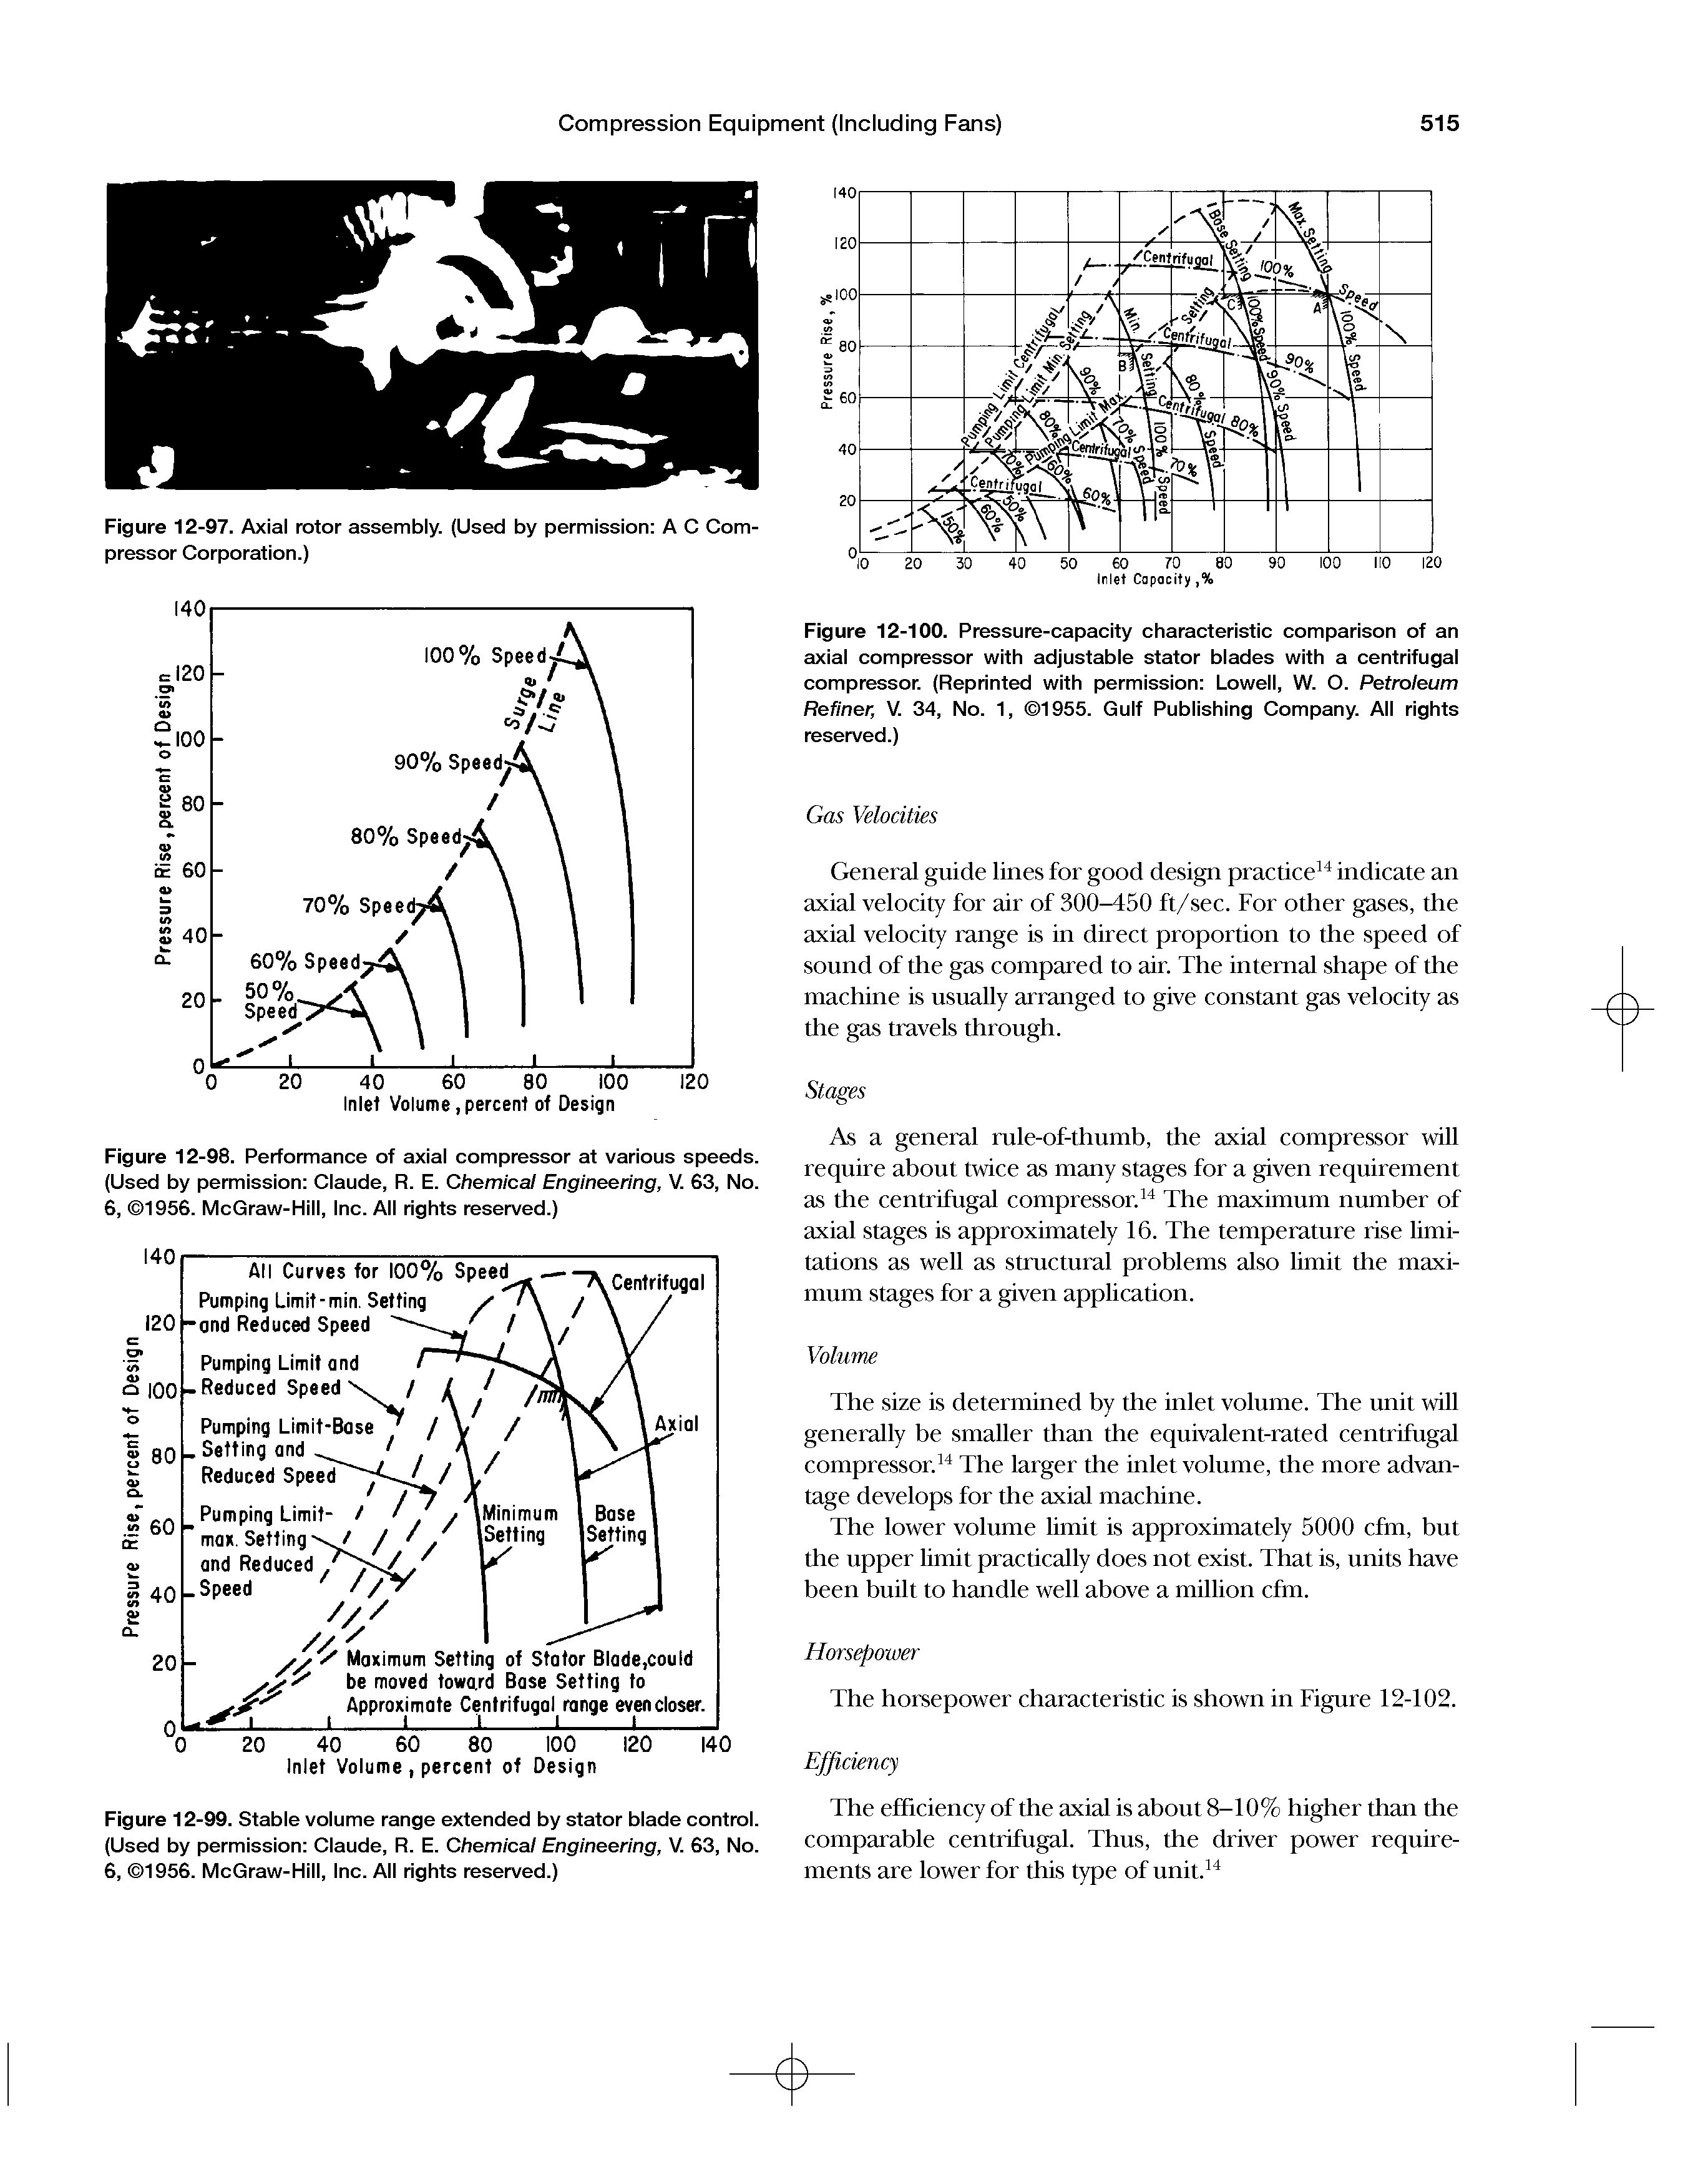 Figure 12-98. Performance of axial compressor at various speeds. (Used by permission Claude, R. E. Chemical Engineering, V. 63, No. 6, 1956. McGraw-Hill, Inc. All rights reserved.)...